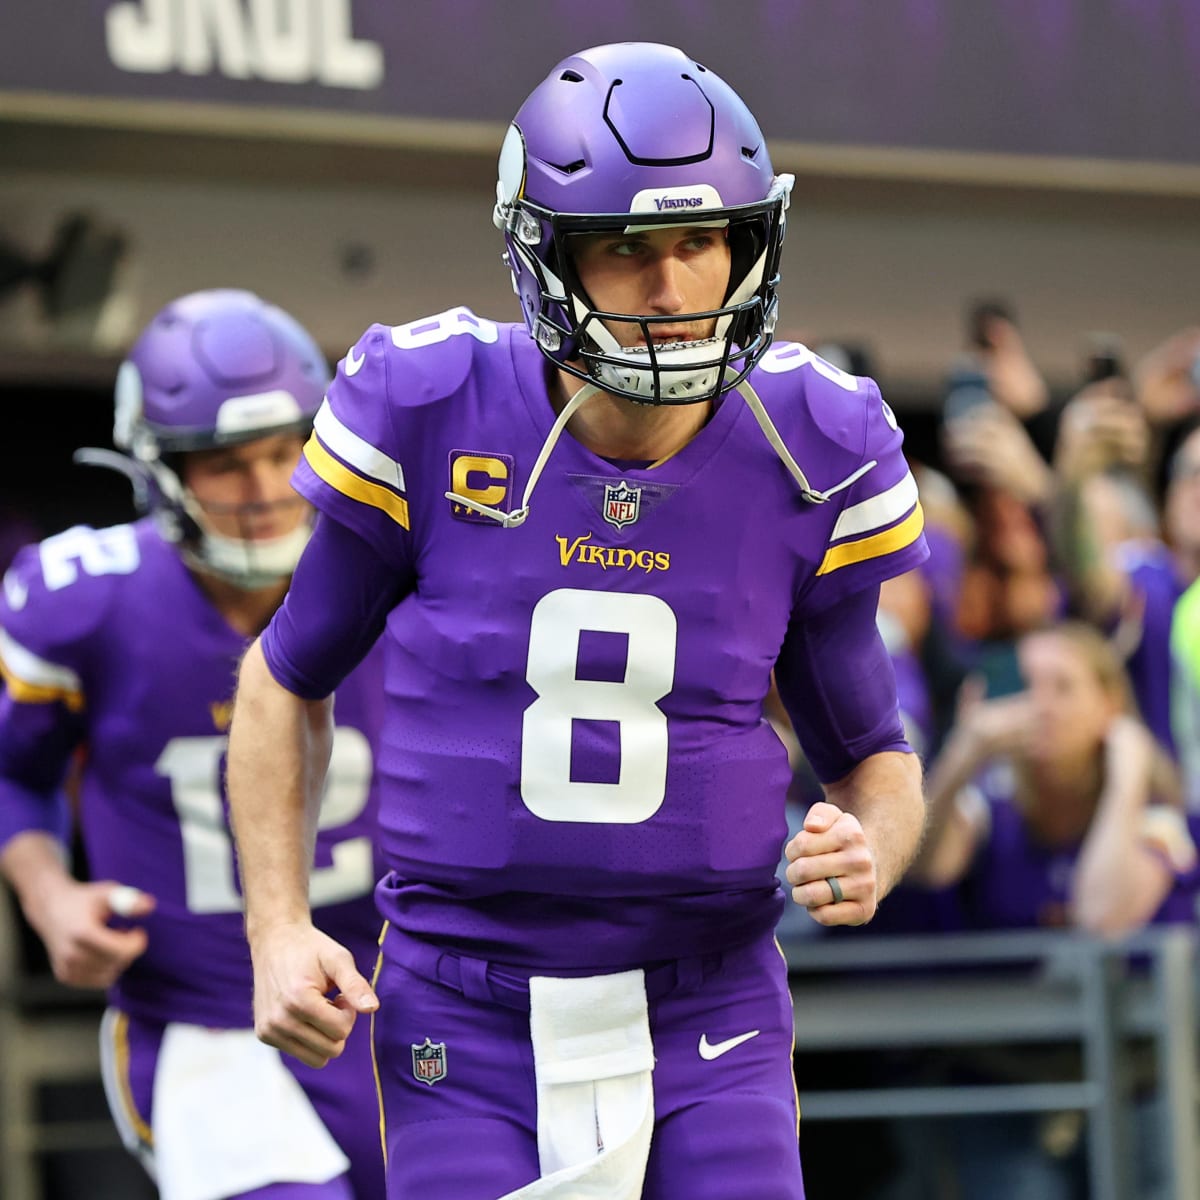 Vikings: First game of 2023 schedule officially announced - A to Z Sports